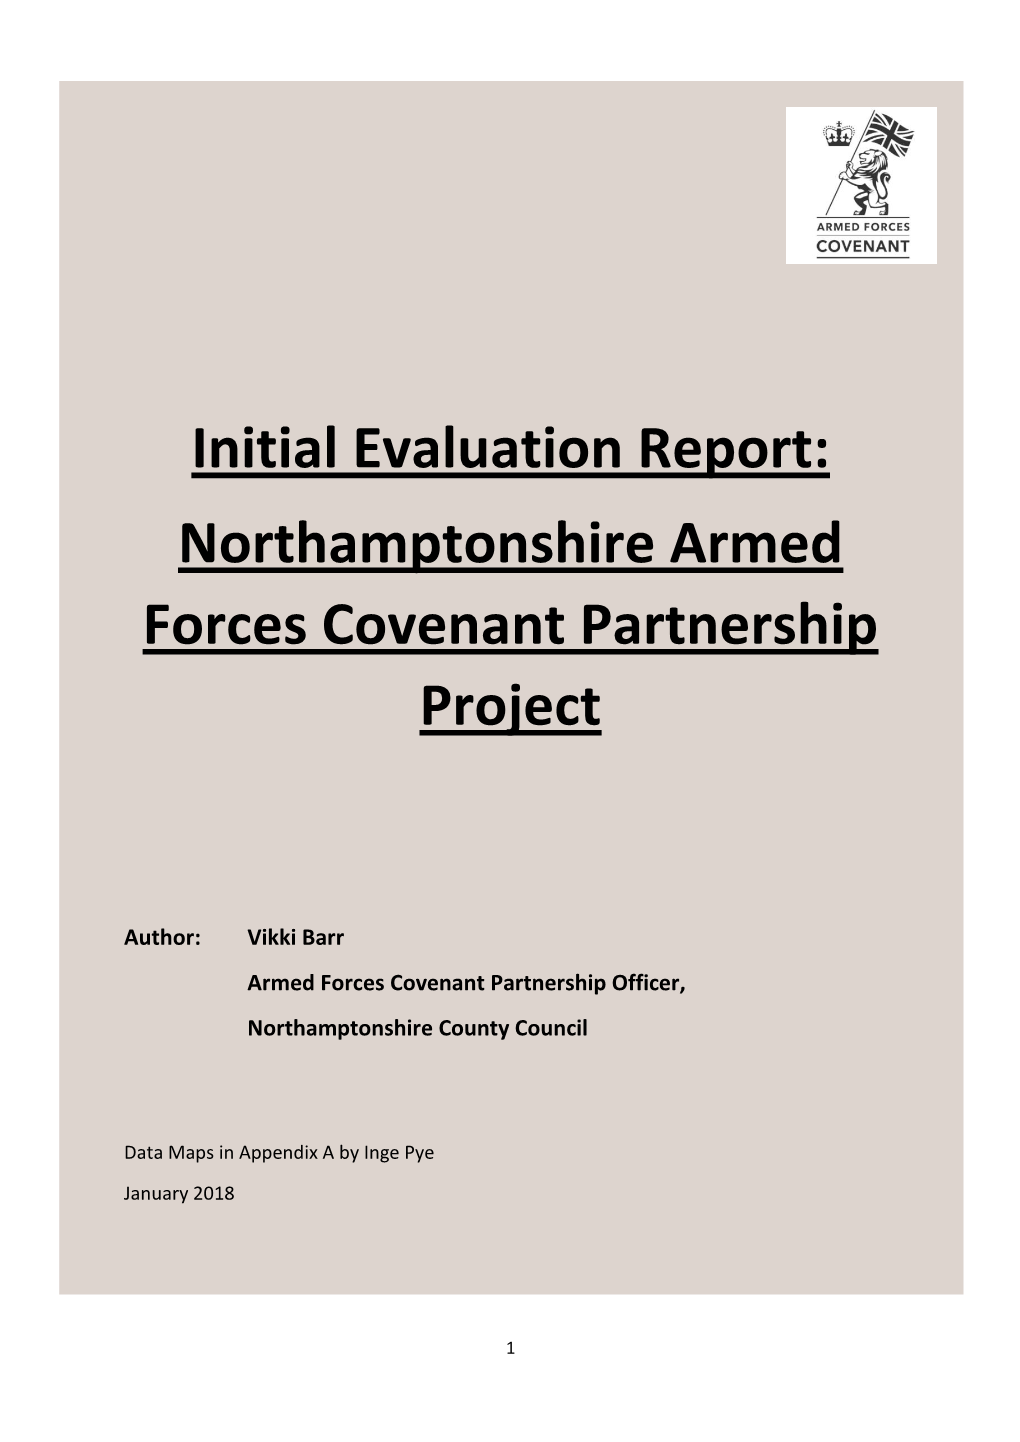 Initial Evaluation Report: Northamptonshire Armed Forces Covenant Partnership Project